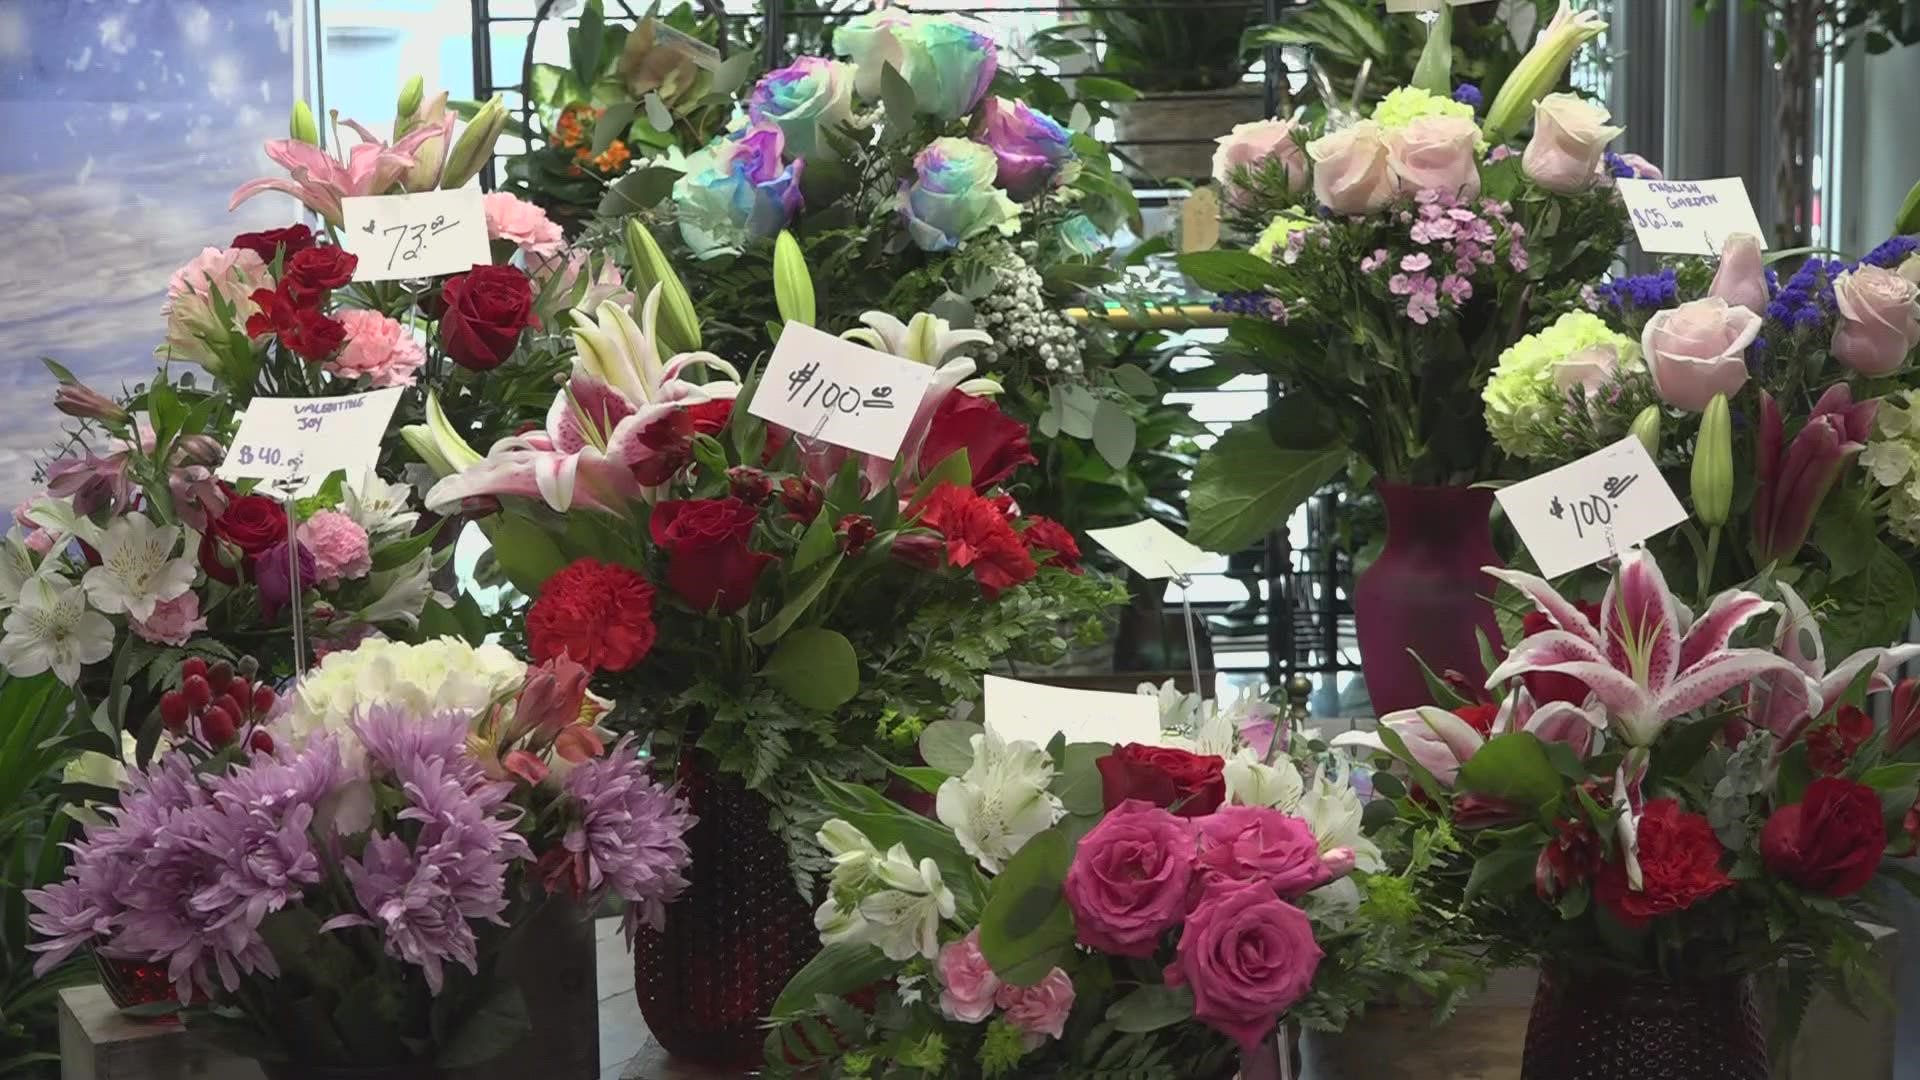 Bangor Floral owner Joseph Langlois said the supply chain issues are even affecting the floral industry this year, causing a flower shortage.